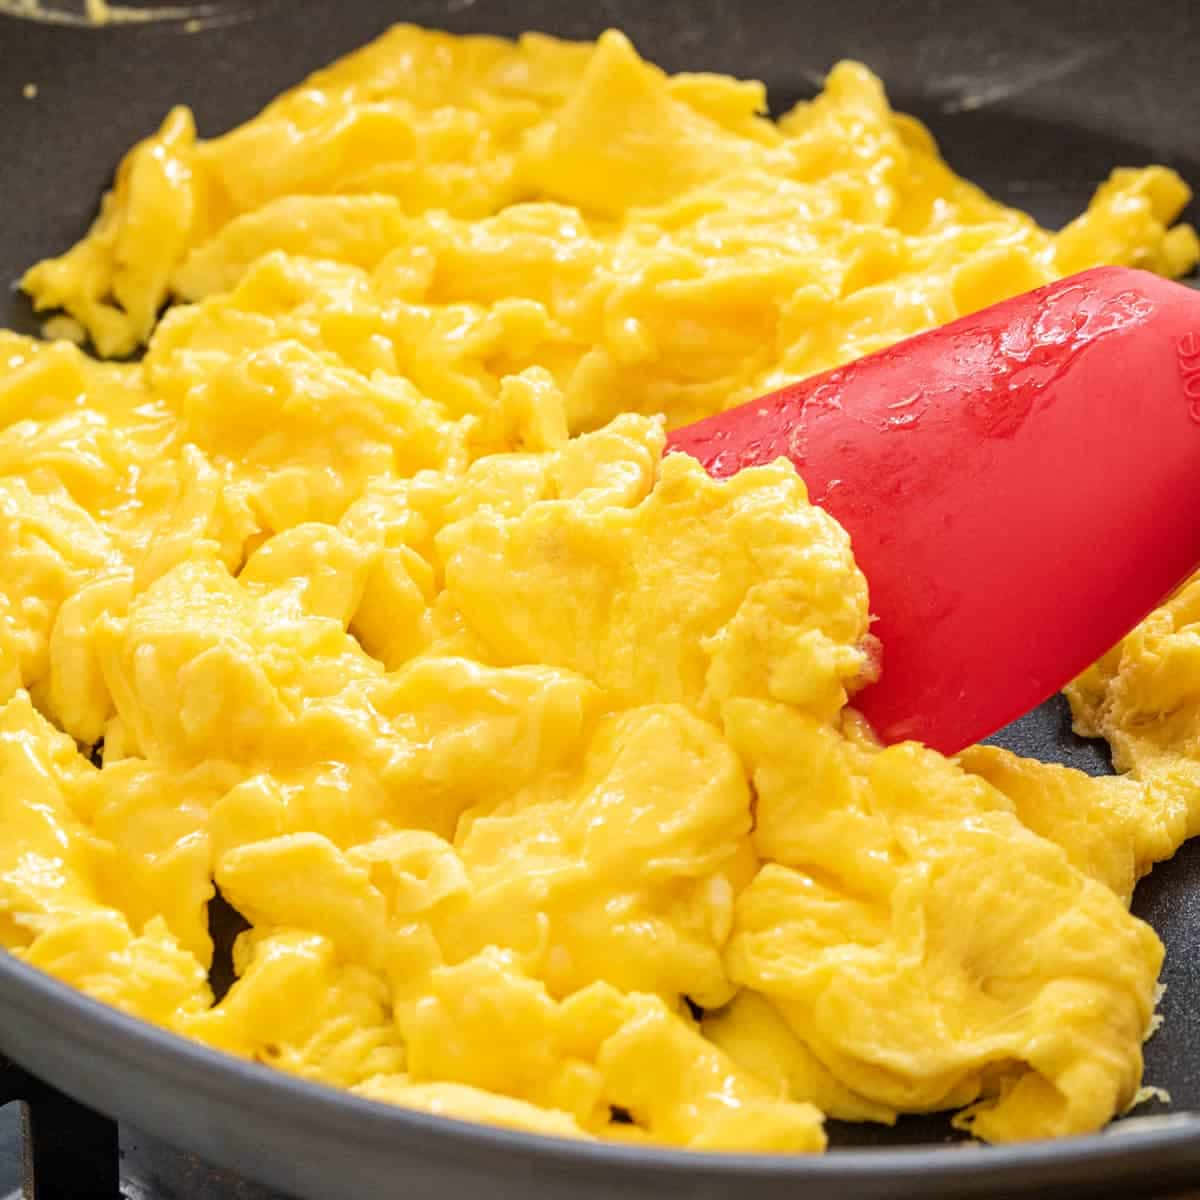 "Scrambled to Perfection"